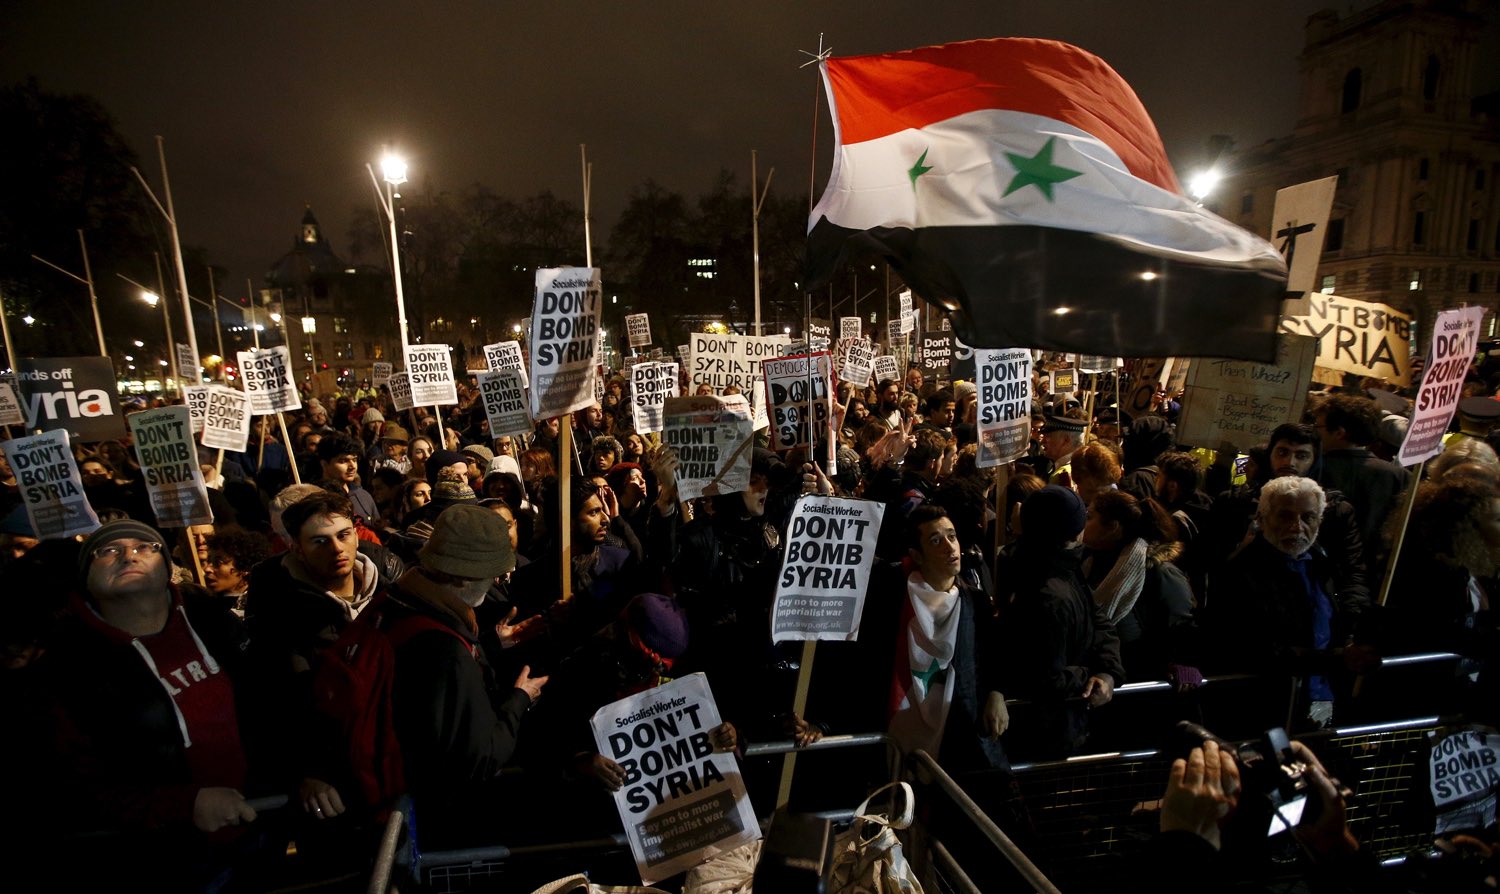 Anti-war protesters demonstrate outside UK  Parliament in London, Dec. 2, 2015. REUTERS